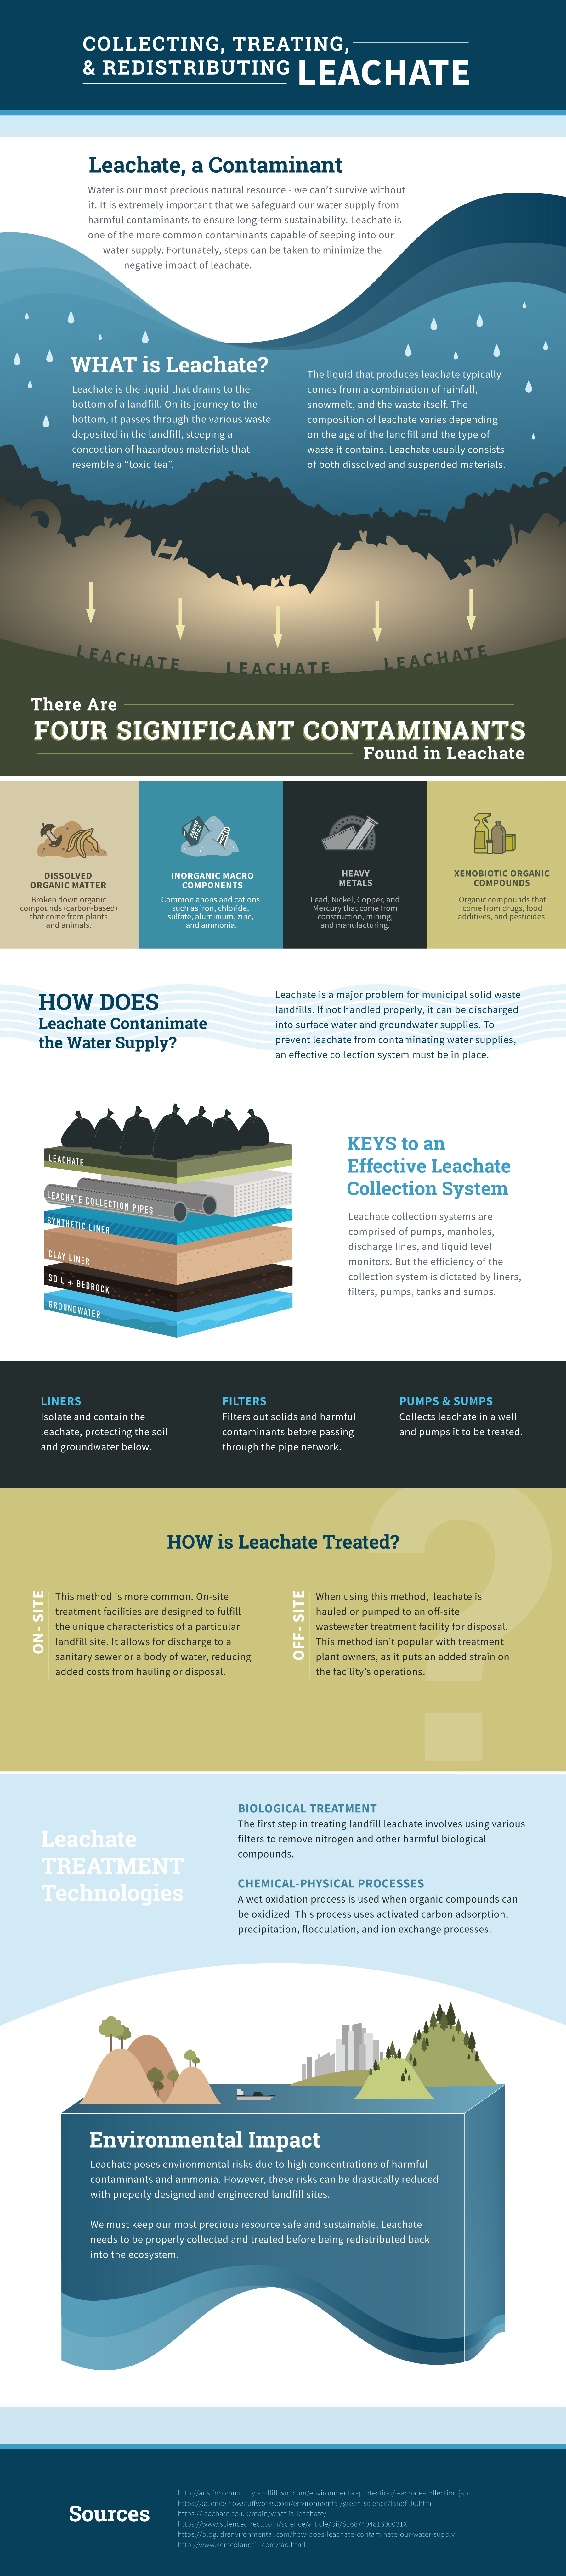 Leachate Infographic - High Tide Technologies